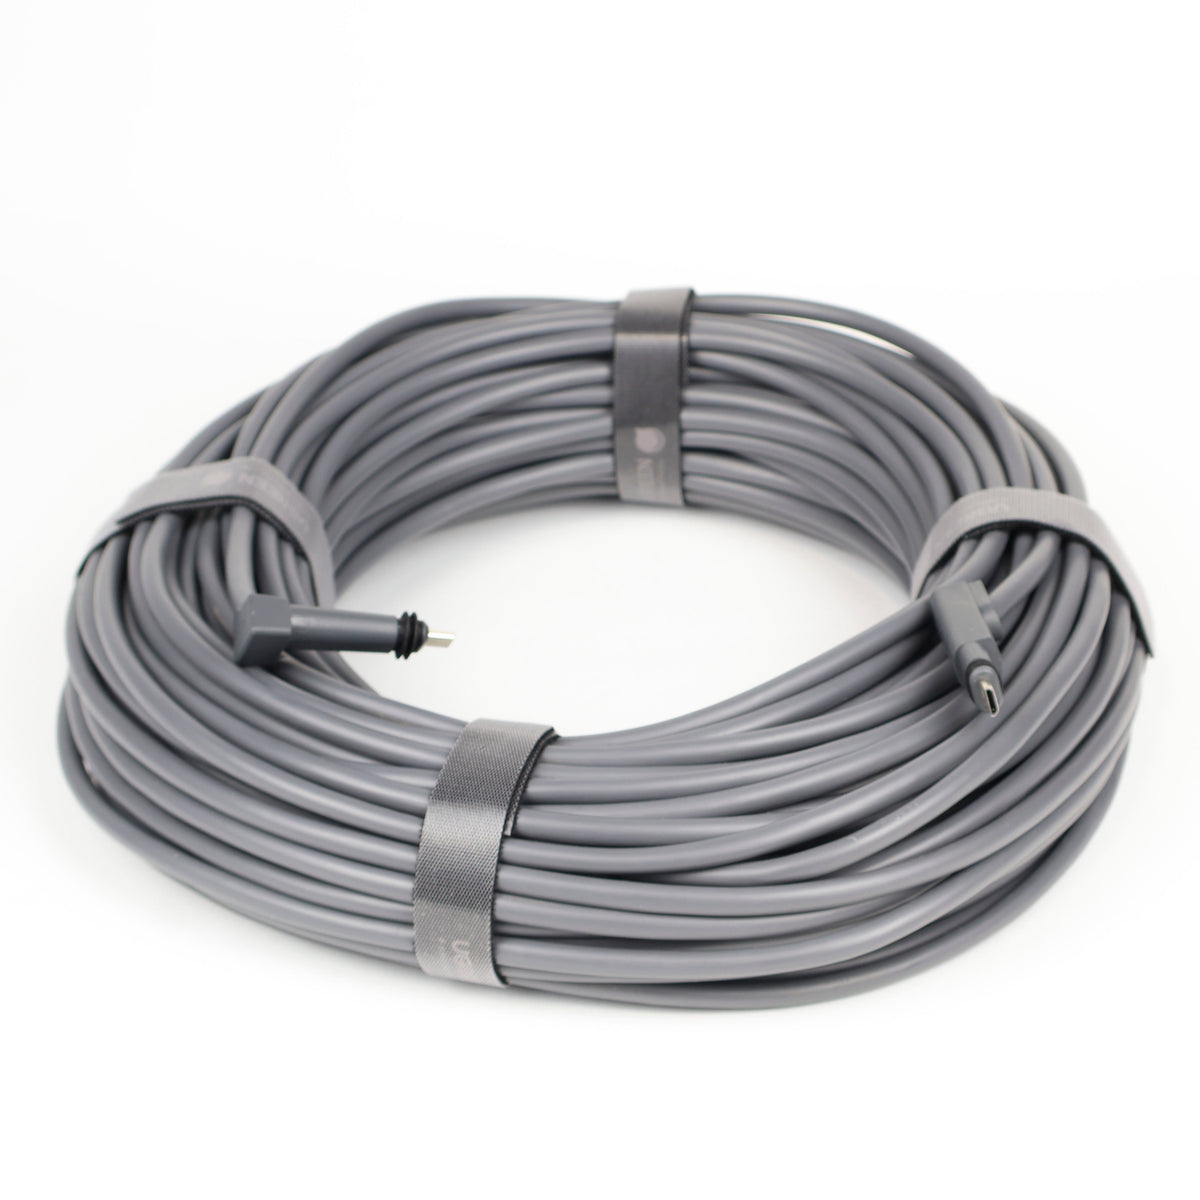 Starlink SPX Cable - 92m (300ft) - EVAAM